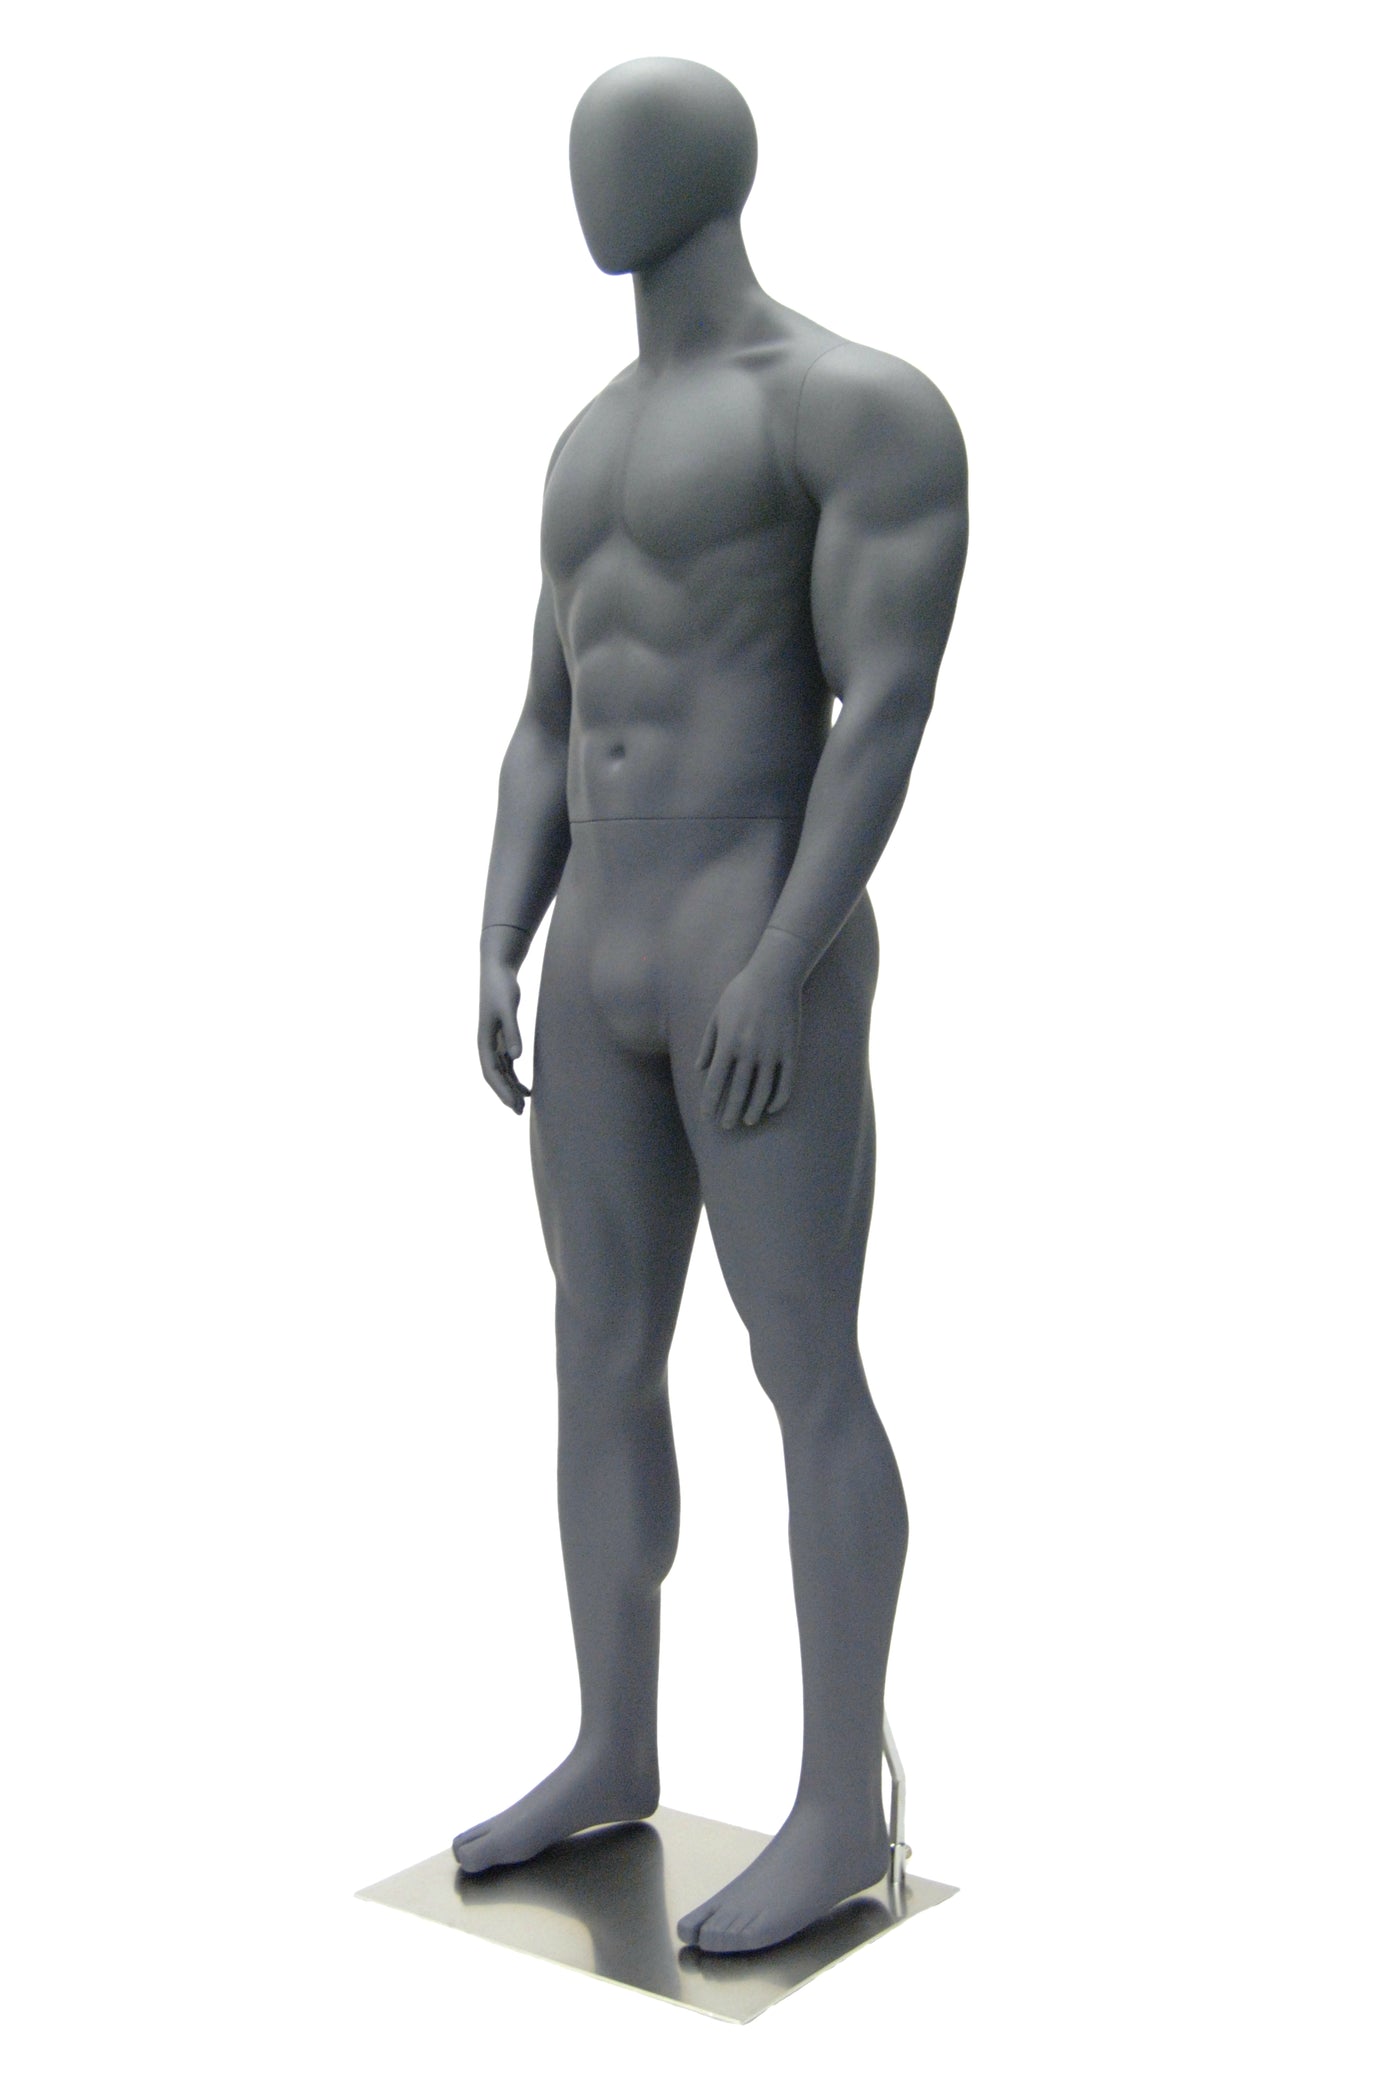 Egghead Male Mannequin in Standing Pose 5: Matte Grey